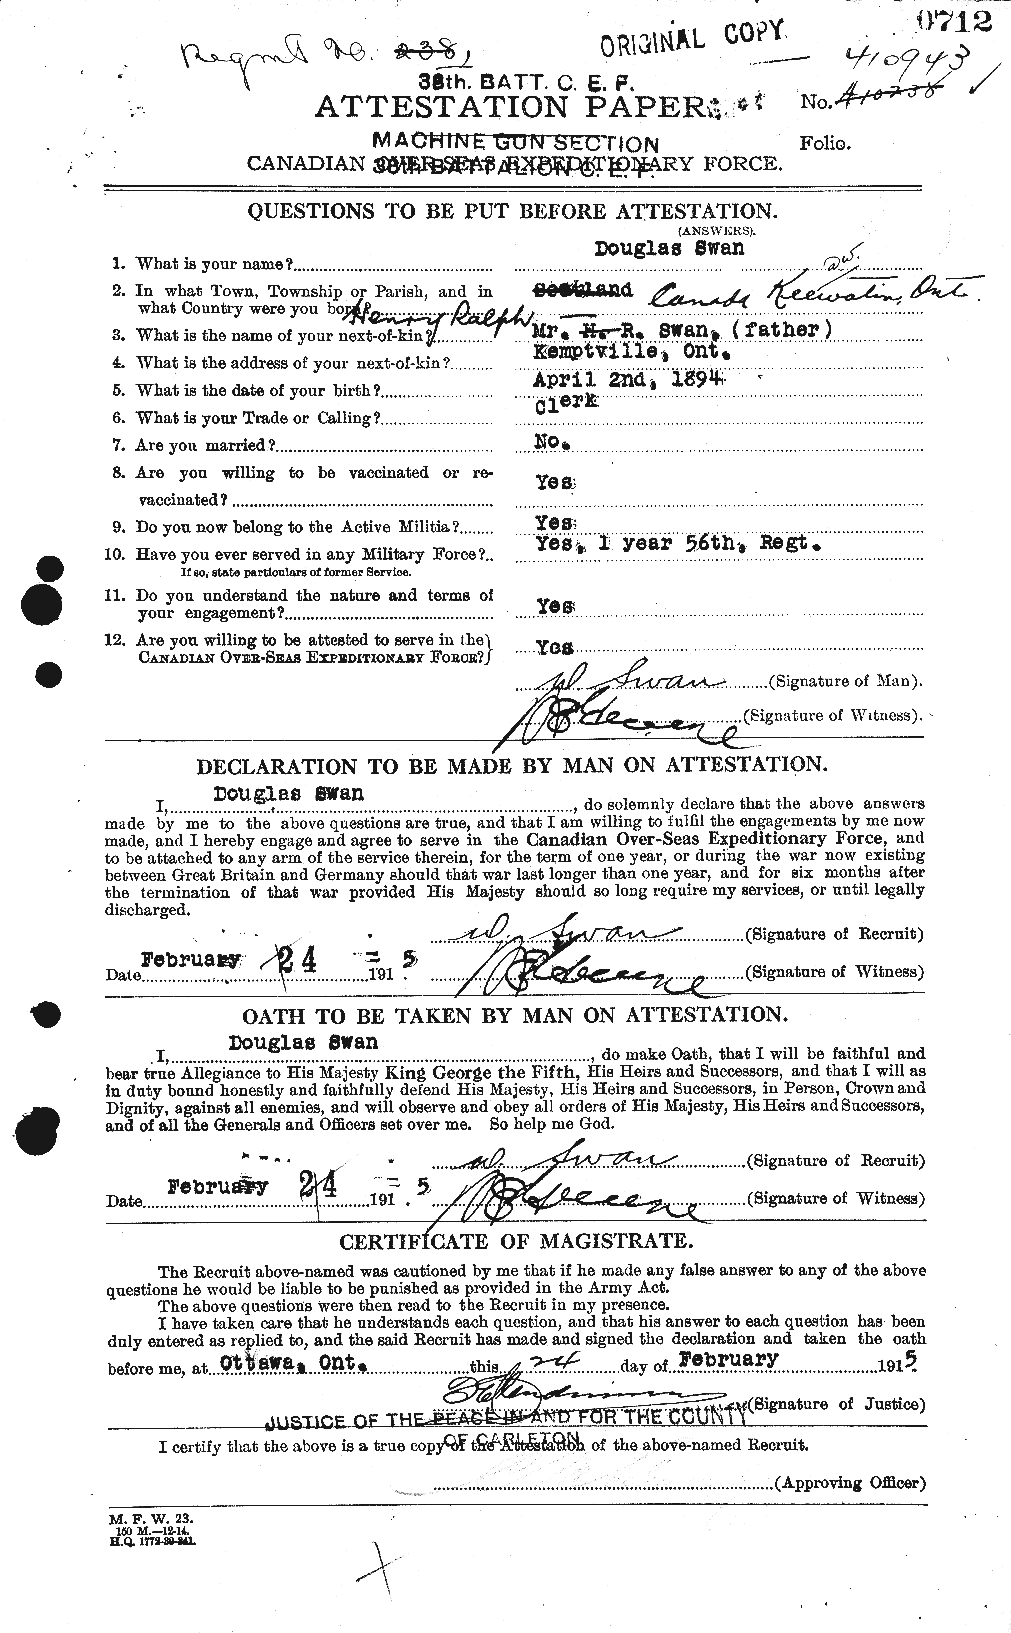 Personnel Records of the First World War - CEF 127374a